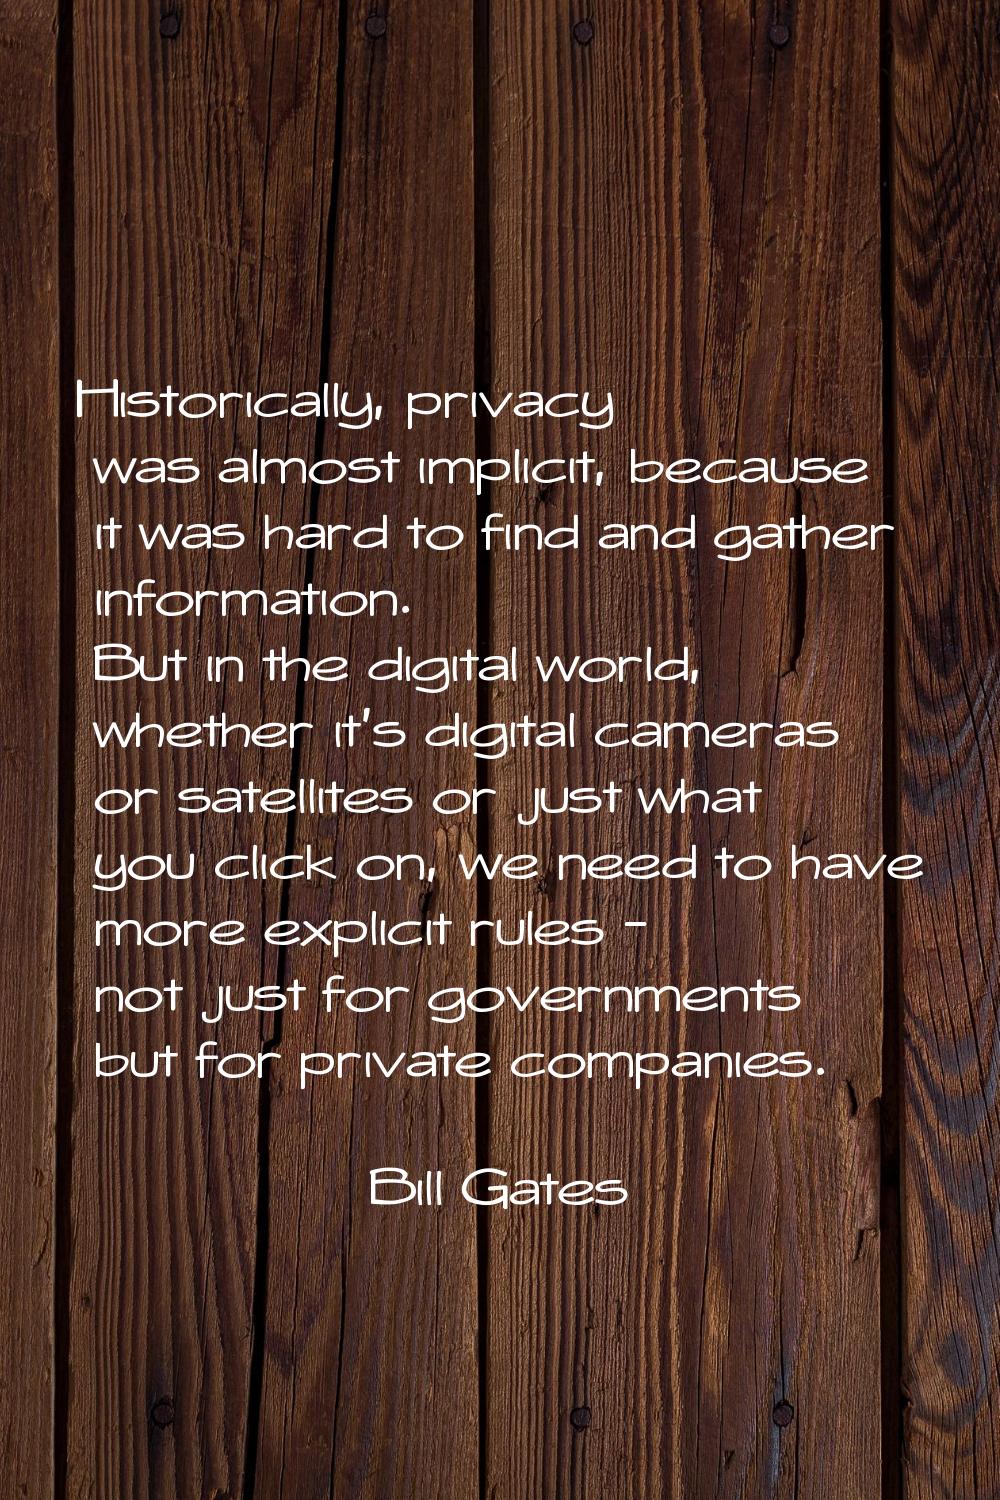 Historically, privacy was almost implicit, because it was hard to find and gather information. But 